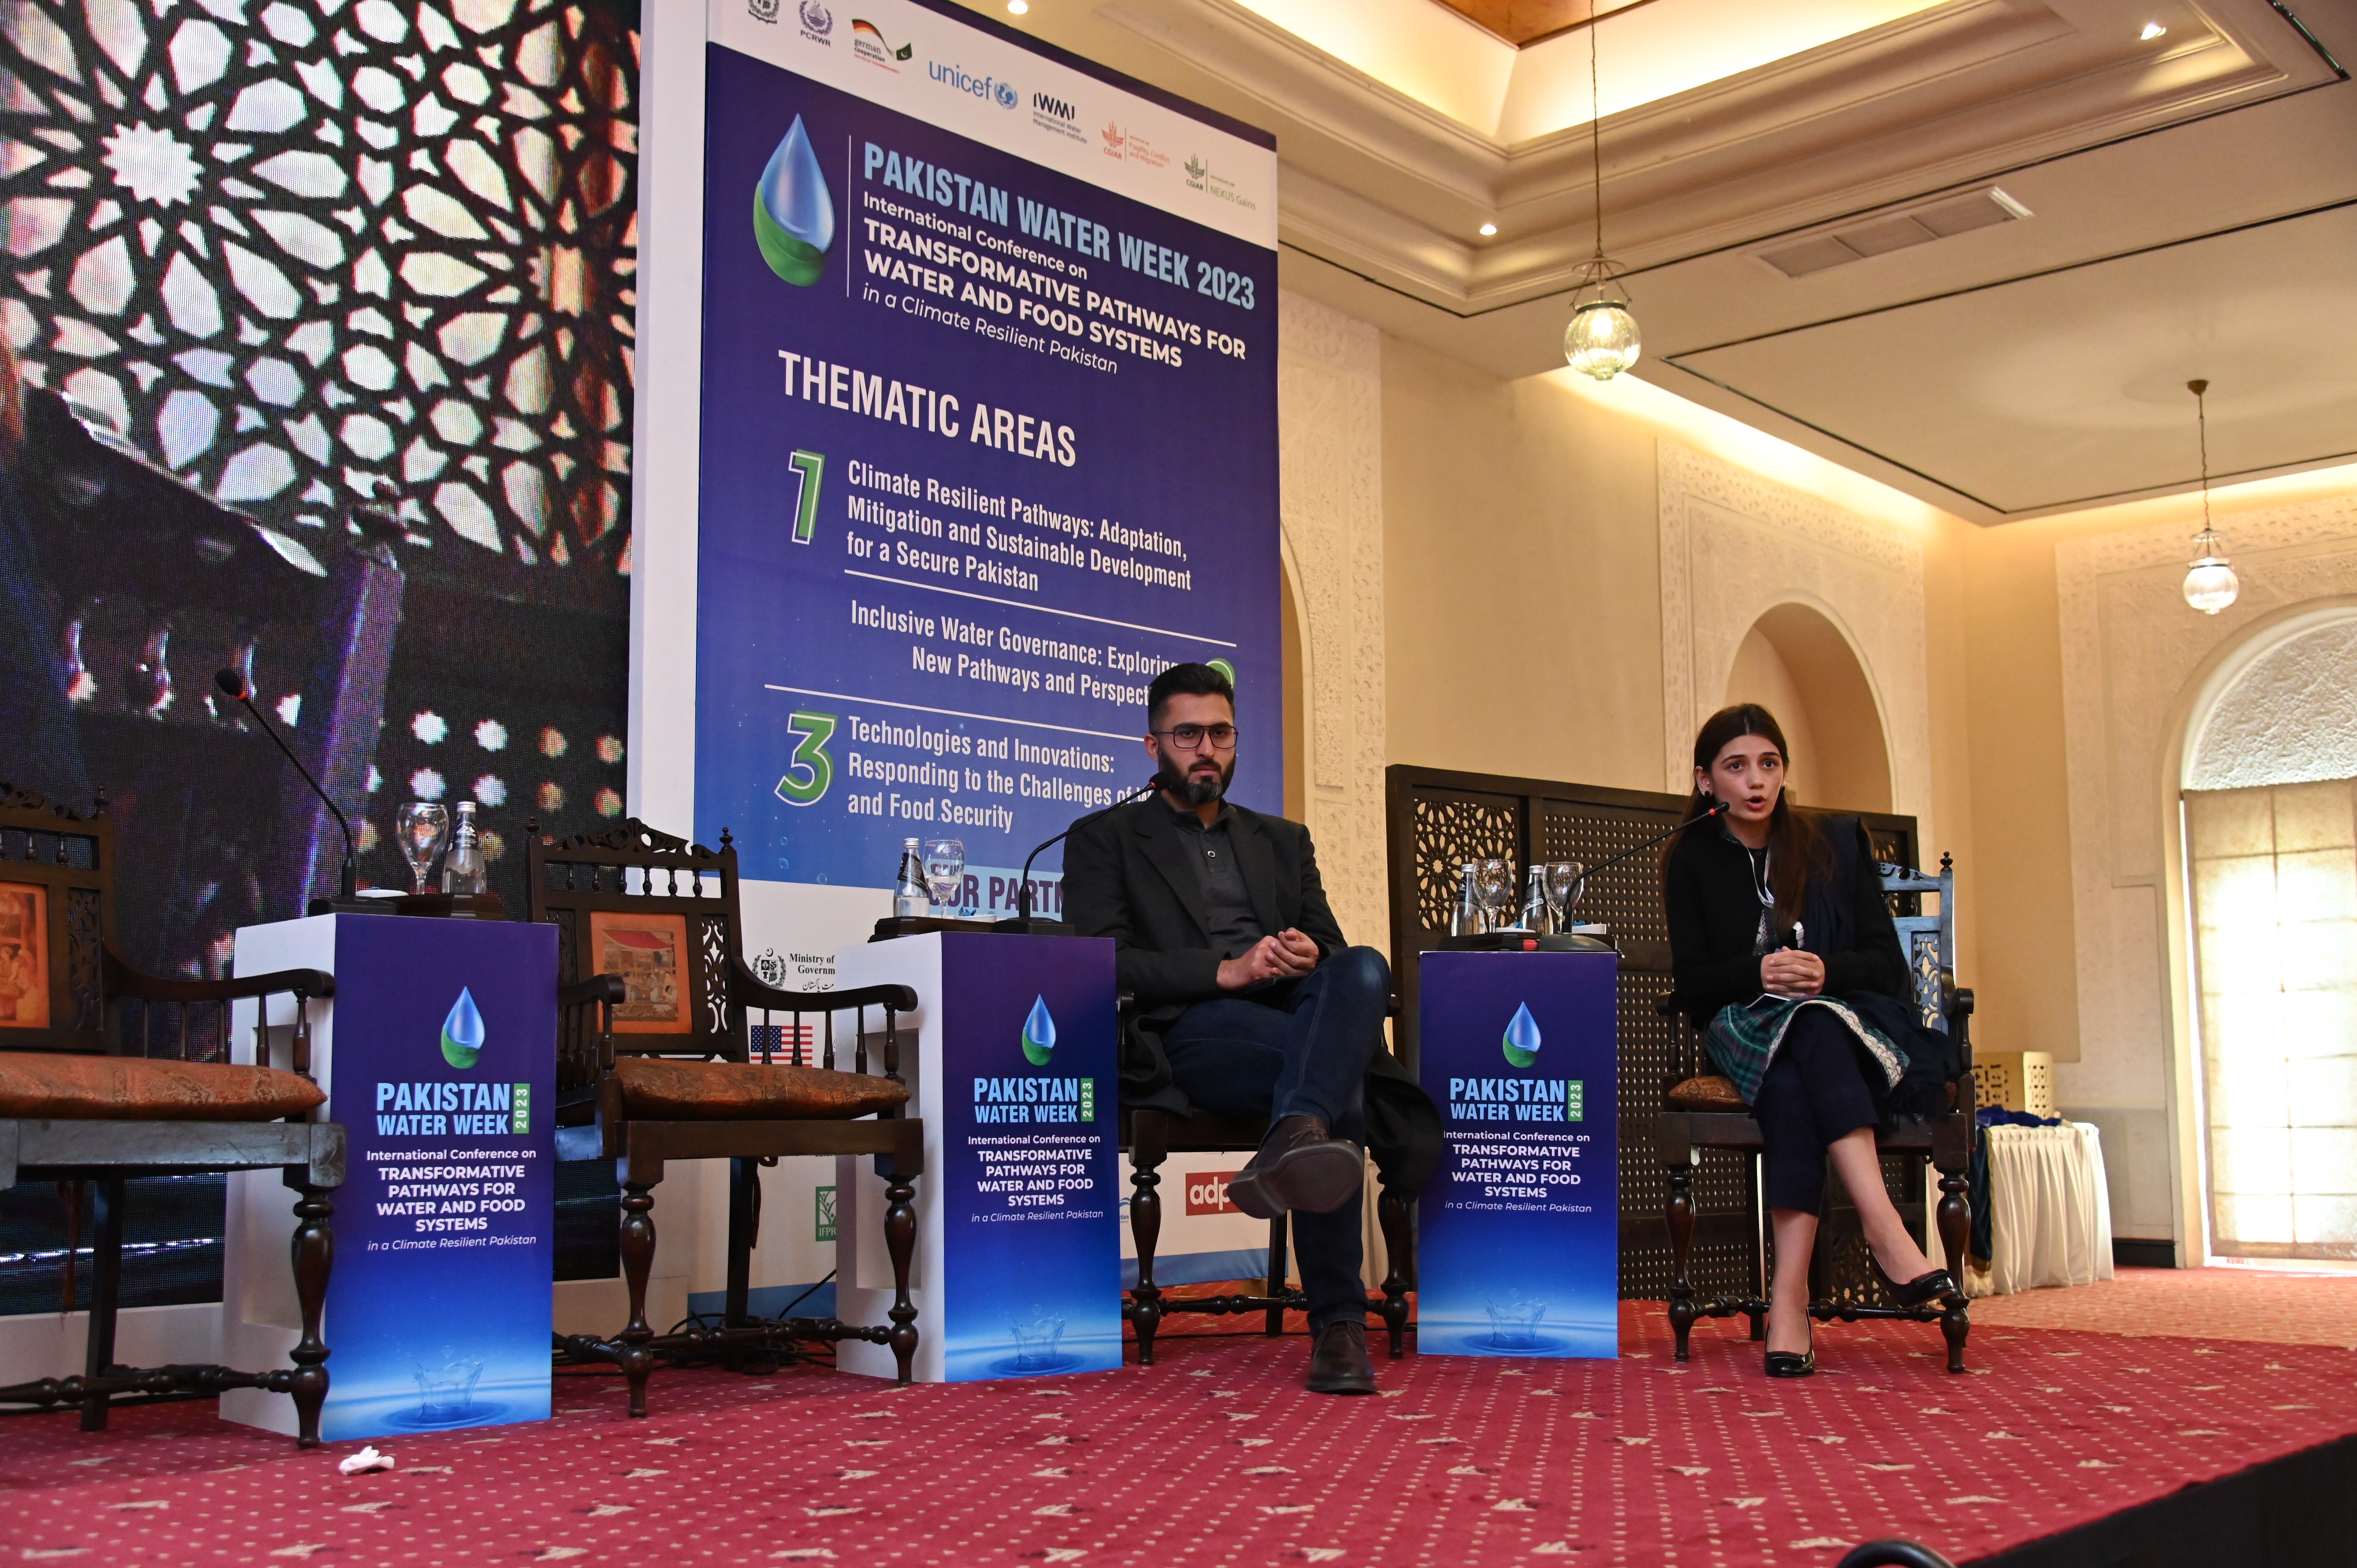 the event organizers and moderators of an International Conference & National Workshop on "PAKISTAN WATER WEEK 2023:TRANSFORMATIVE PATHWAYS FOR WATER AND FOOD SYSTEM"